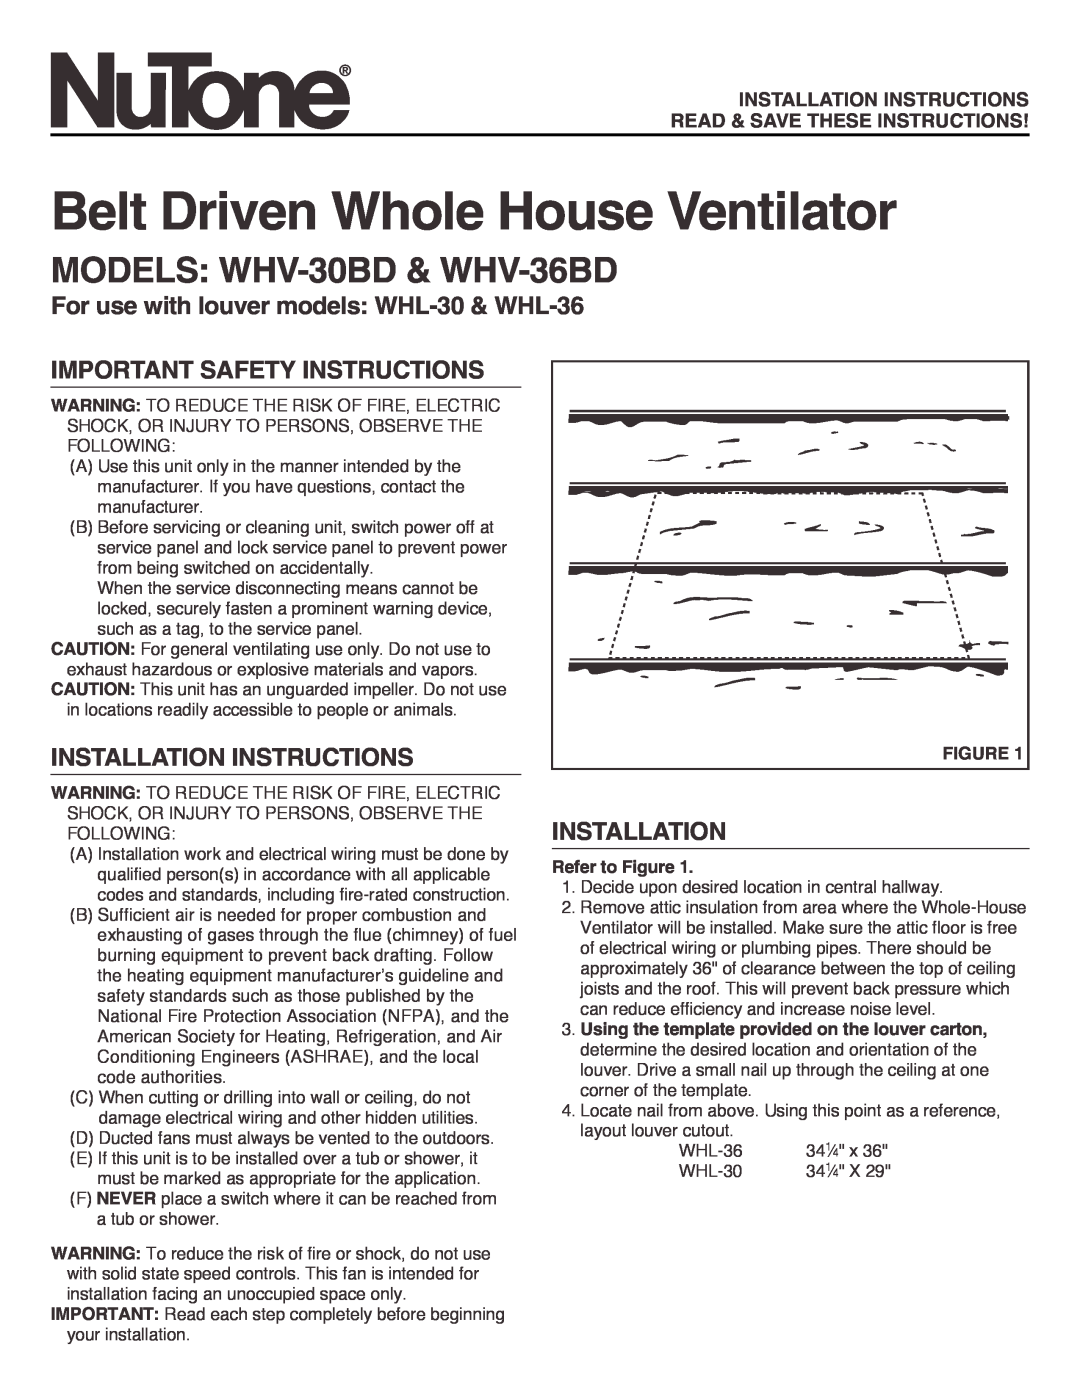 NuTone WHV-30BD & WHV-36BD installation instructions For use with louver models WHL-30& WHL-36, Installation Instructions 